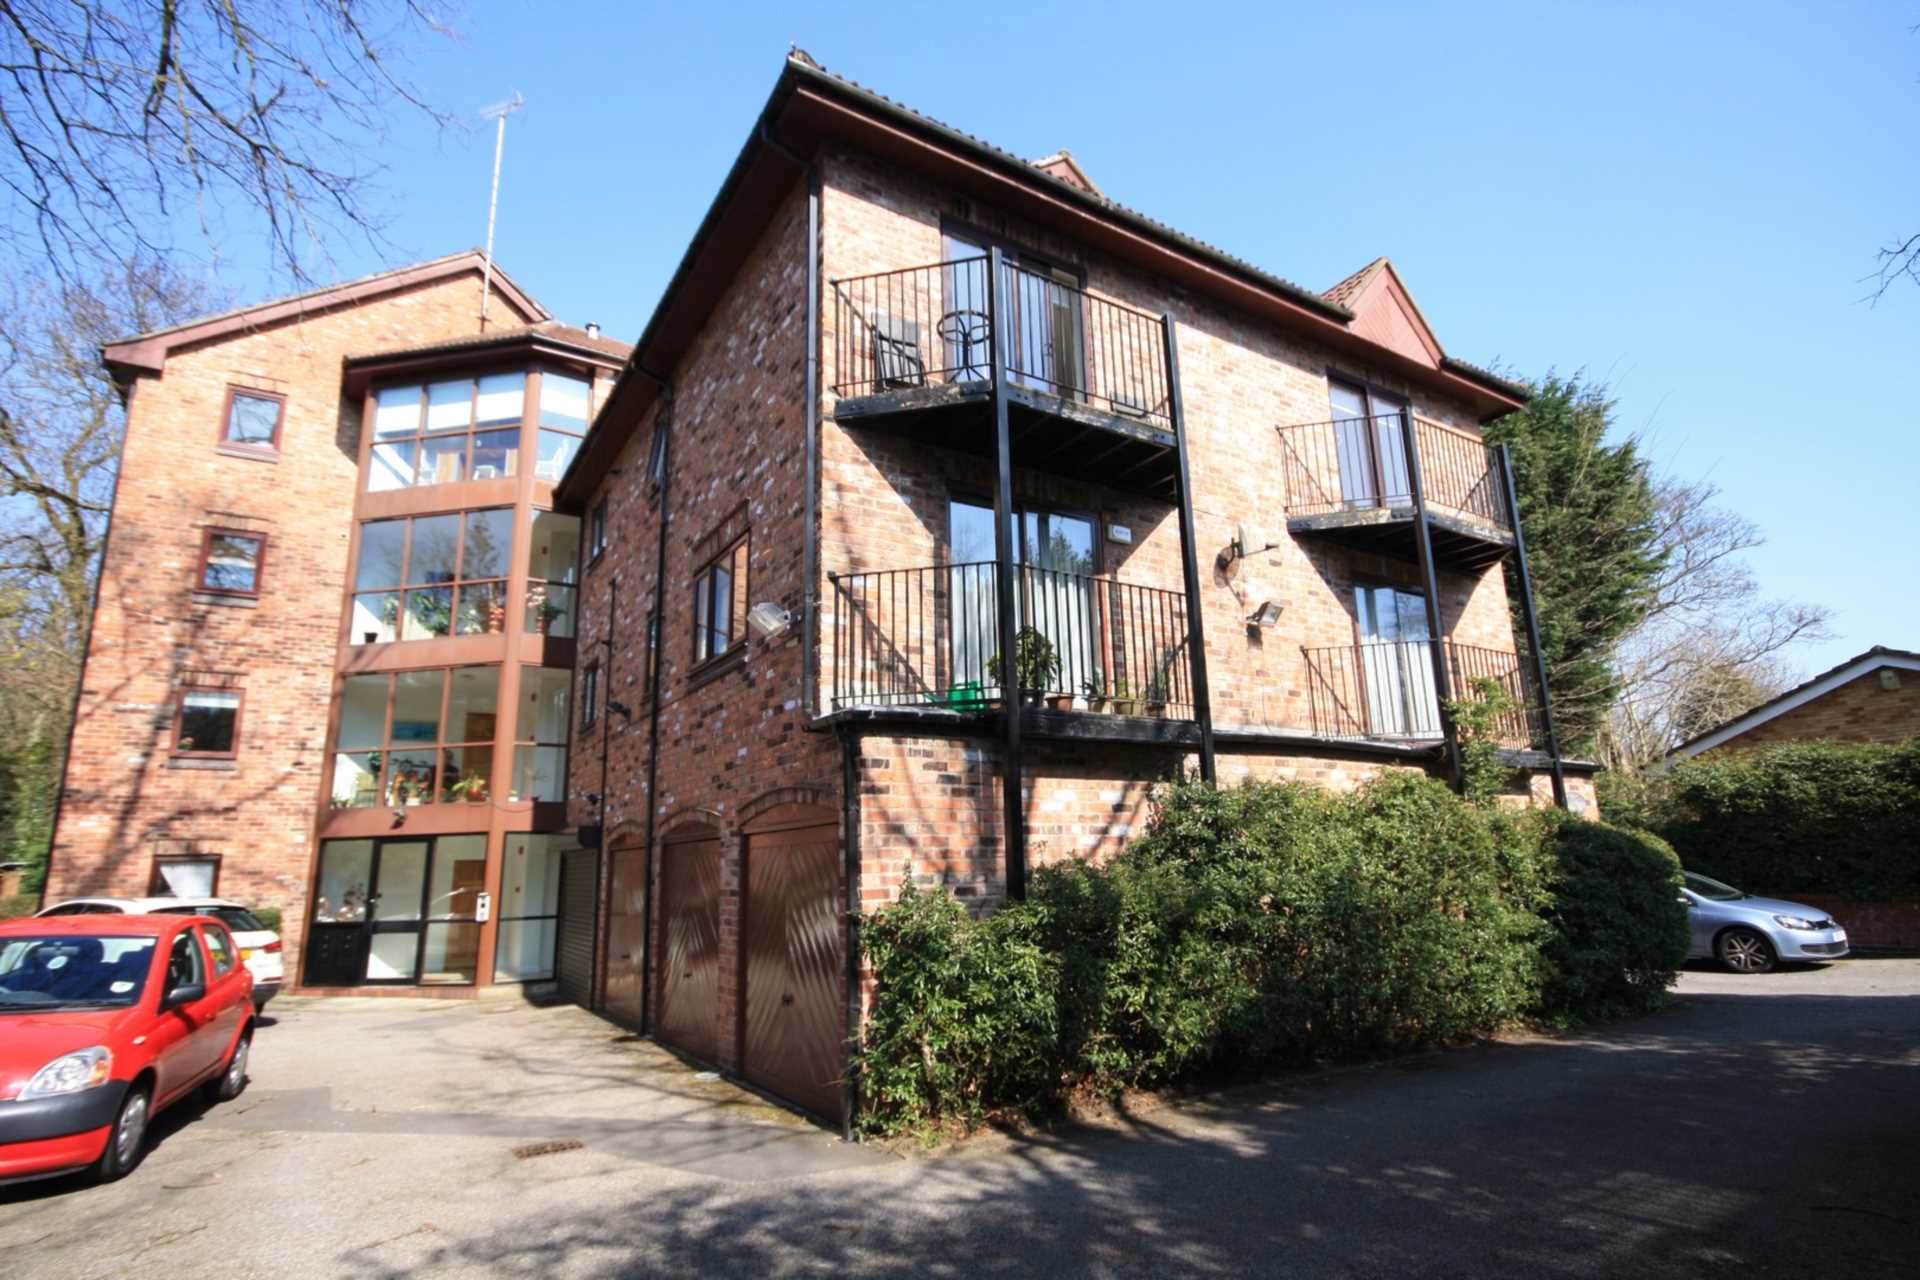 Penthouse, Oakleigh, St Anns Road, Prestwich, Image 1